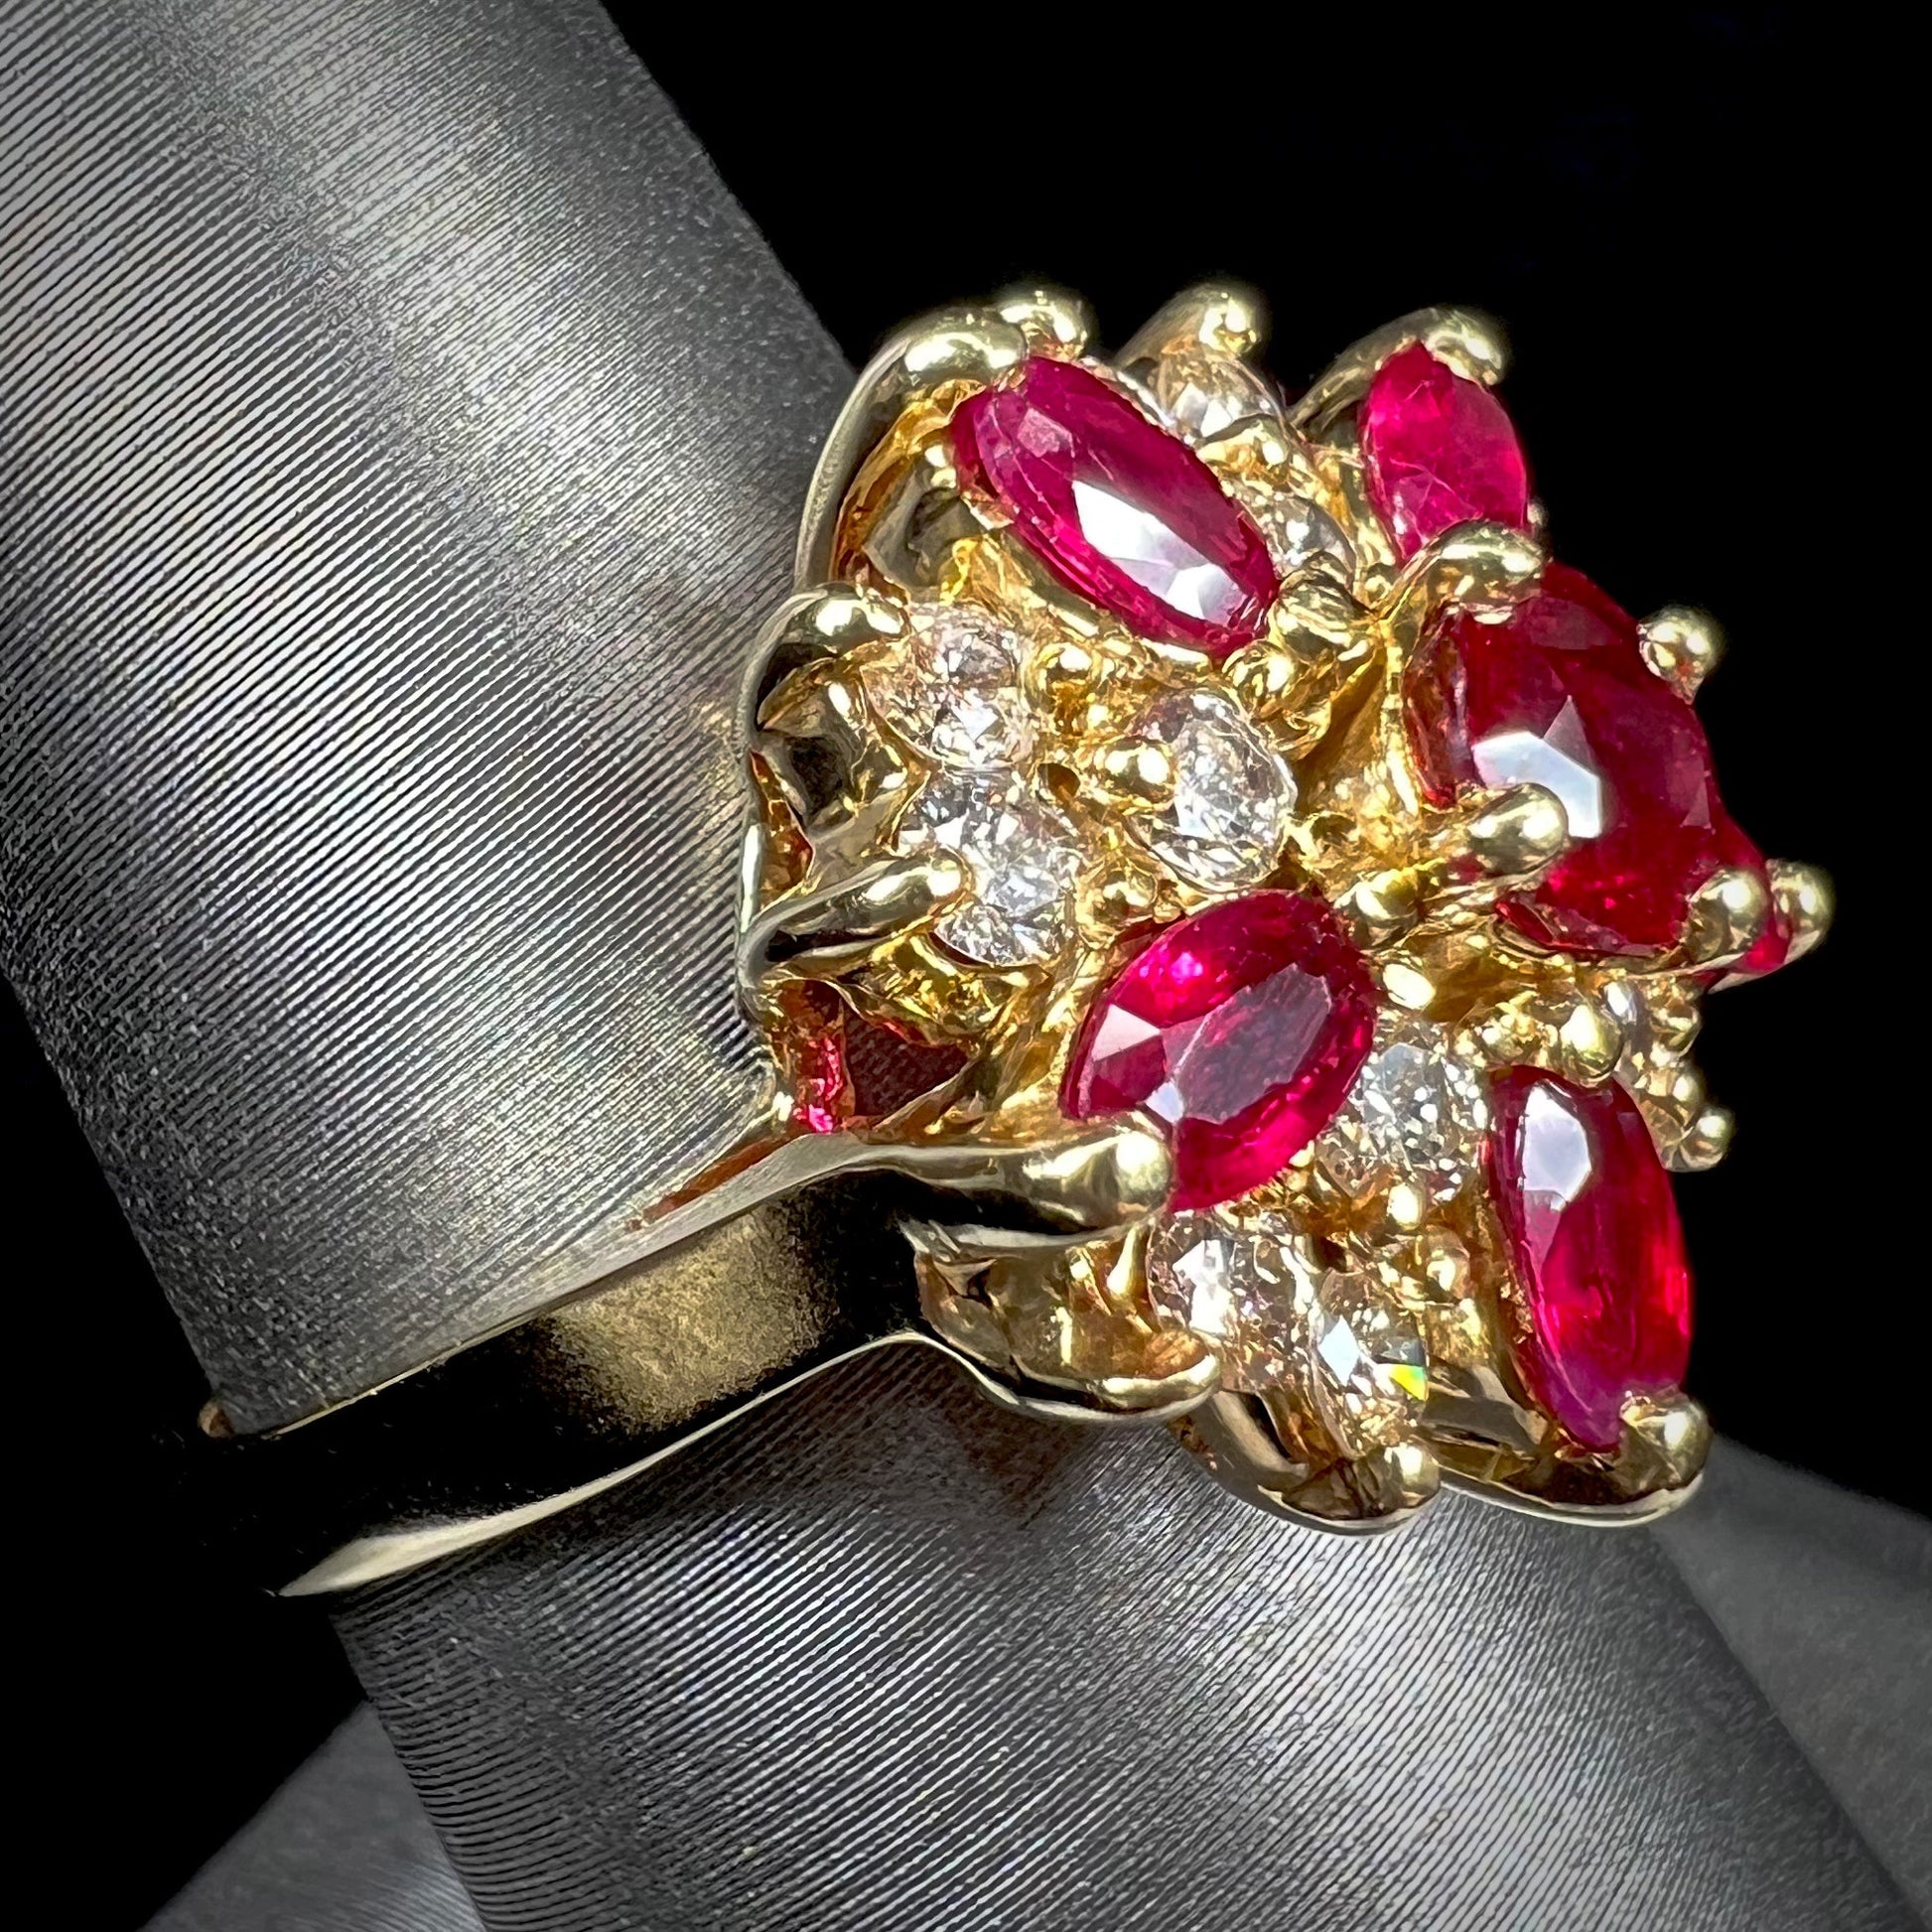 A ladies' vintage yellow gold cluster ring set with diamonds and pigeon blood red Burma rubies.